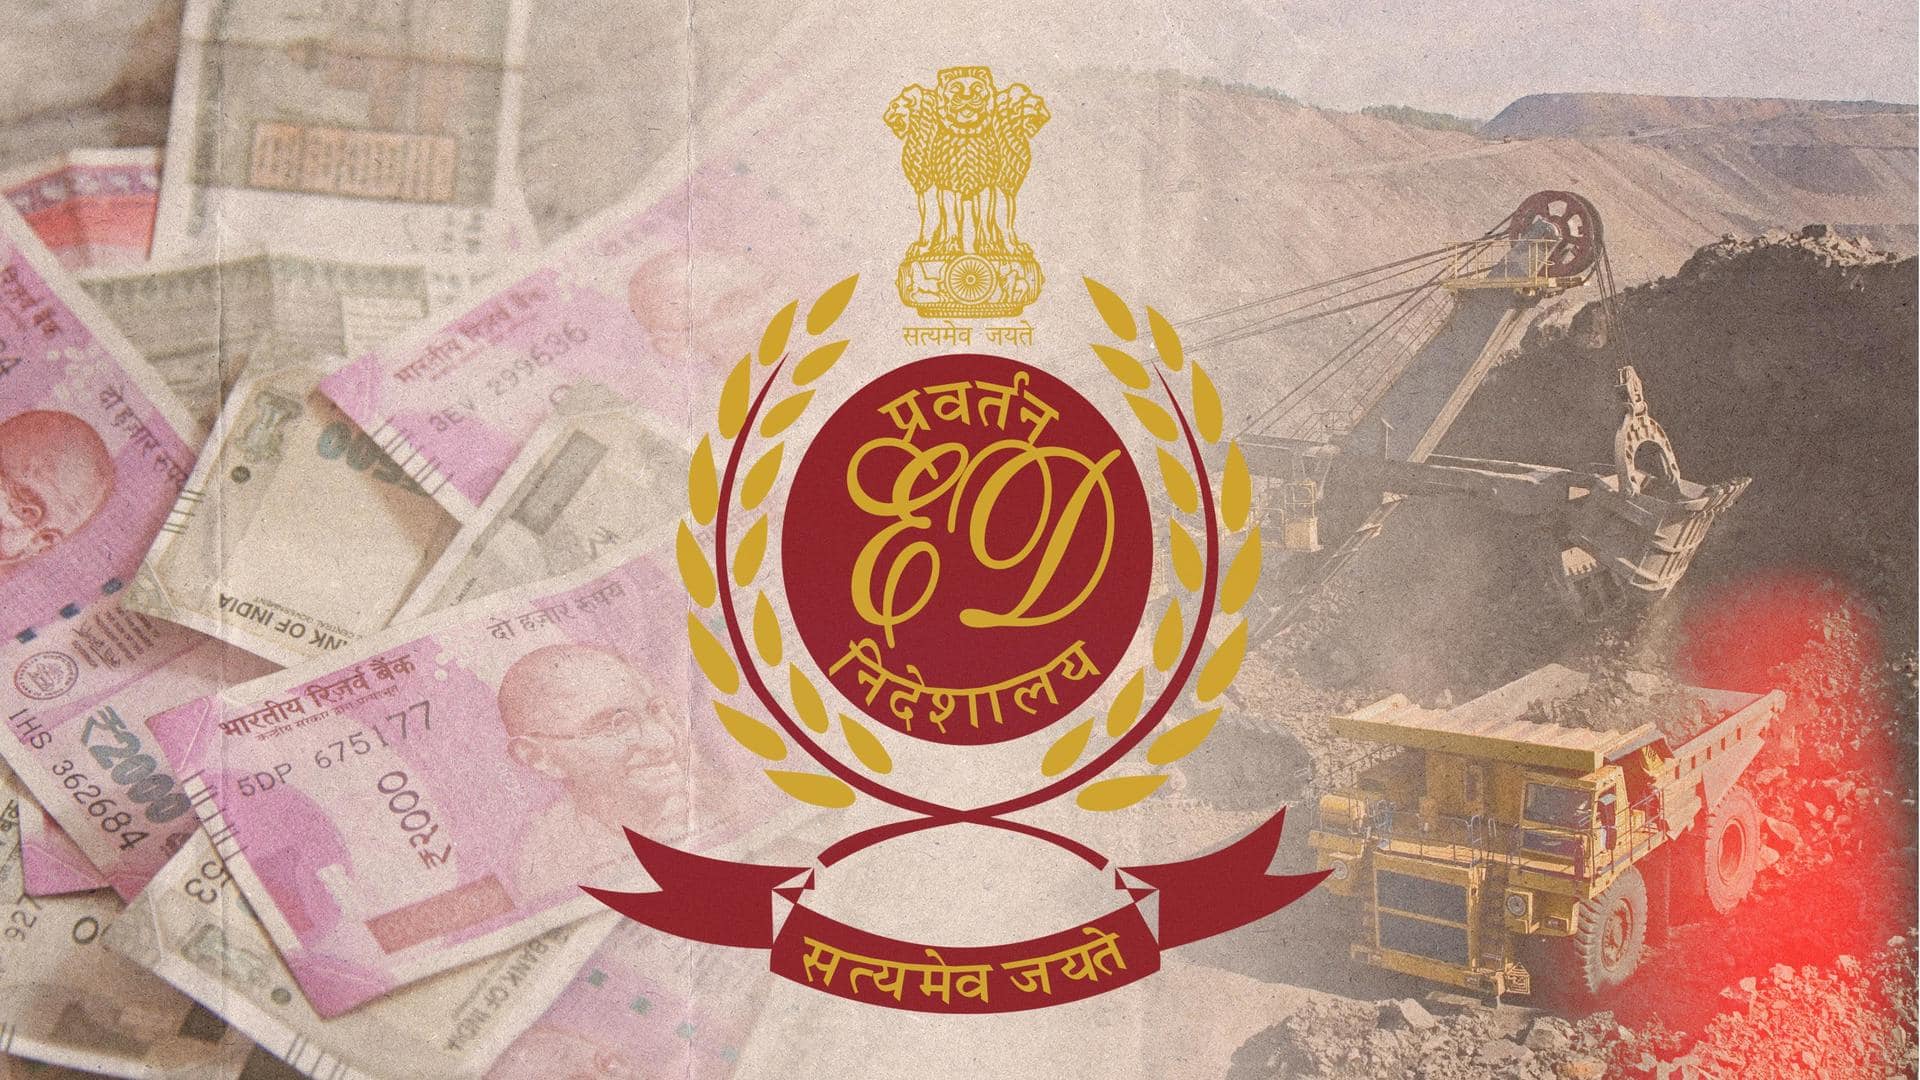 ED uncovers Rs. 250 crore sand mining scam in Bihar